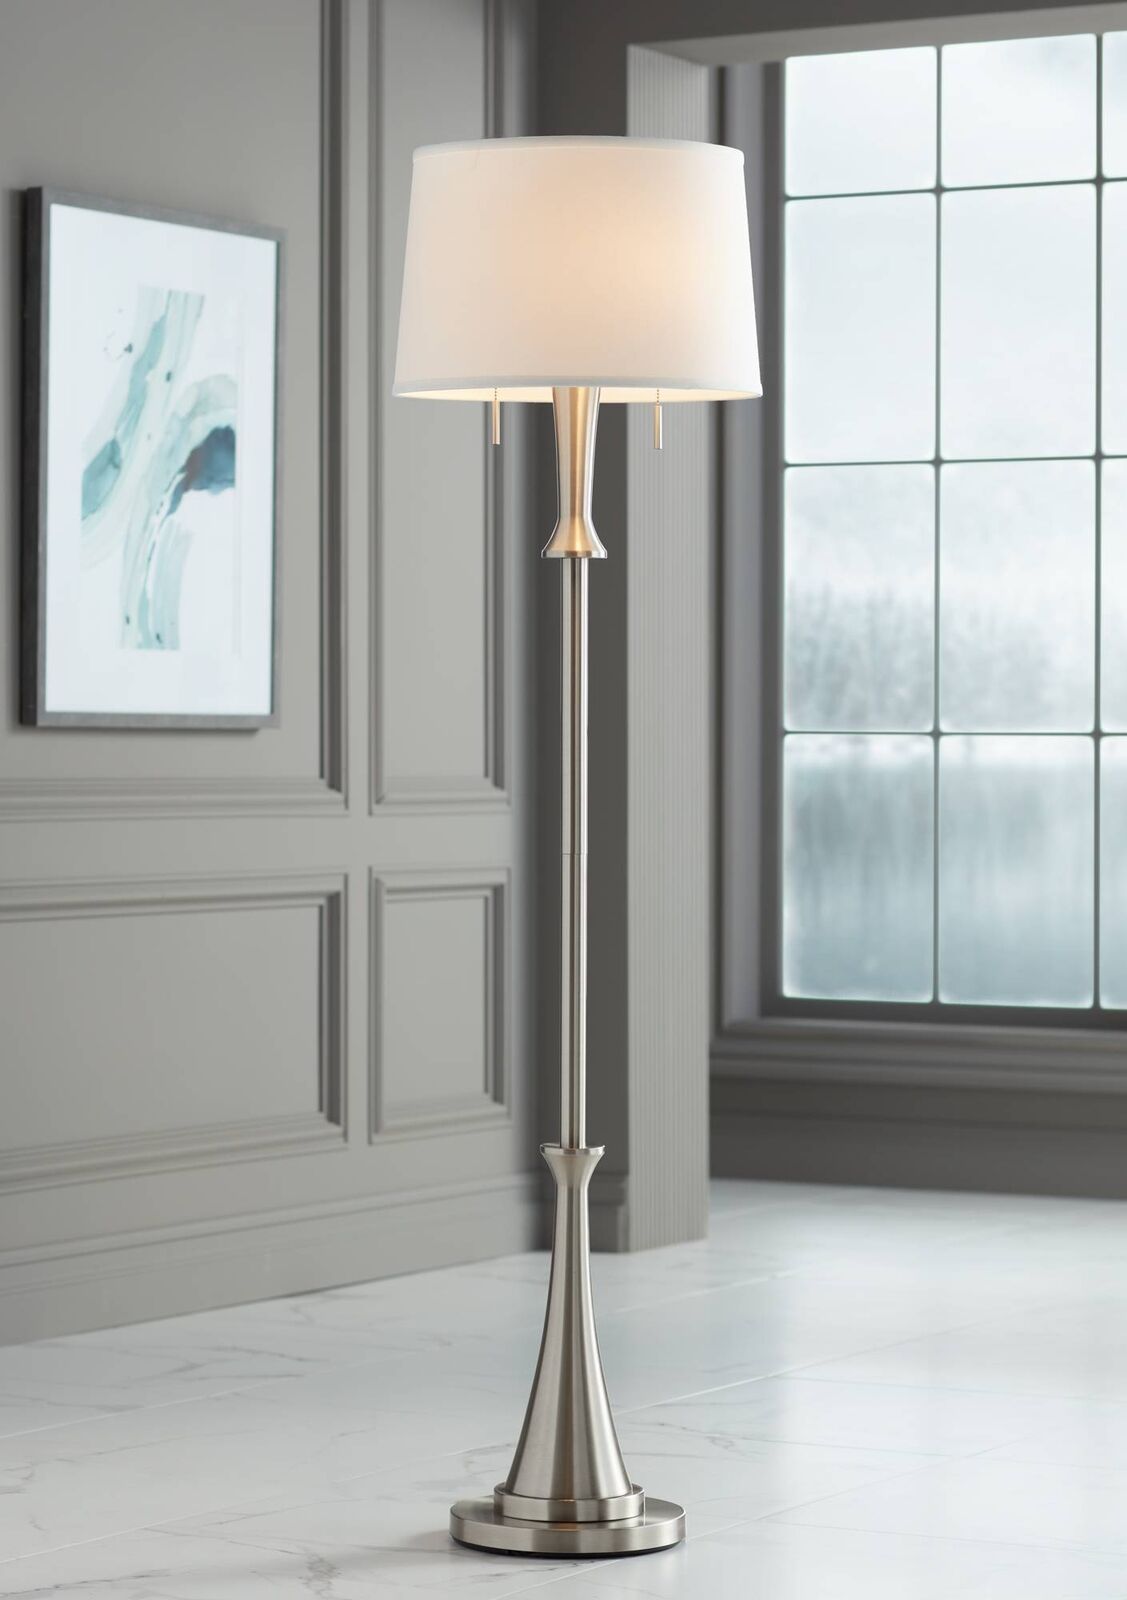 Modern Floor Lamp Brushed Nickel White Drum Shade For Living Room Reading  House | Ebay Throughout Glass Satin Nickel Floor Lamps (View 9 of 15)